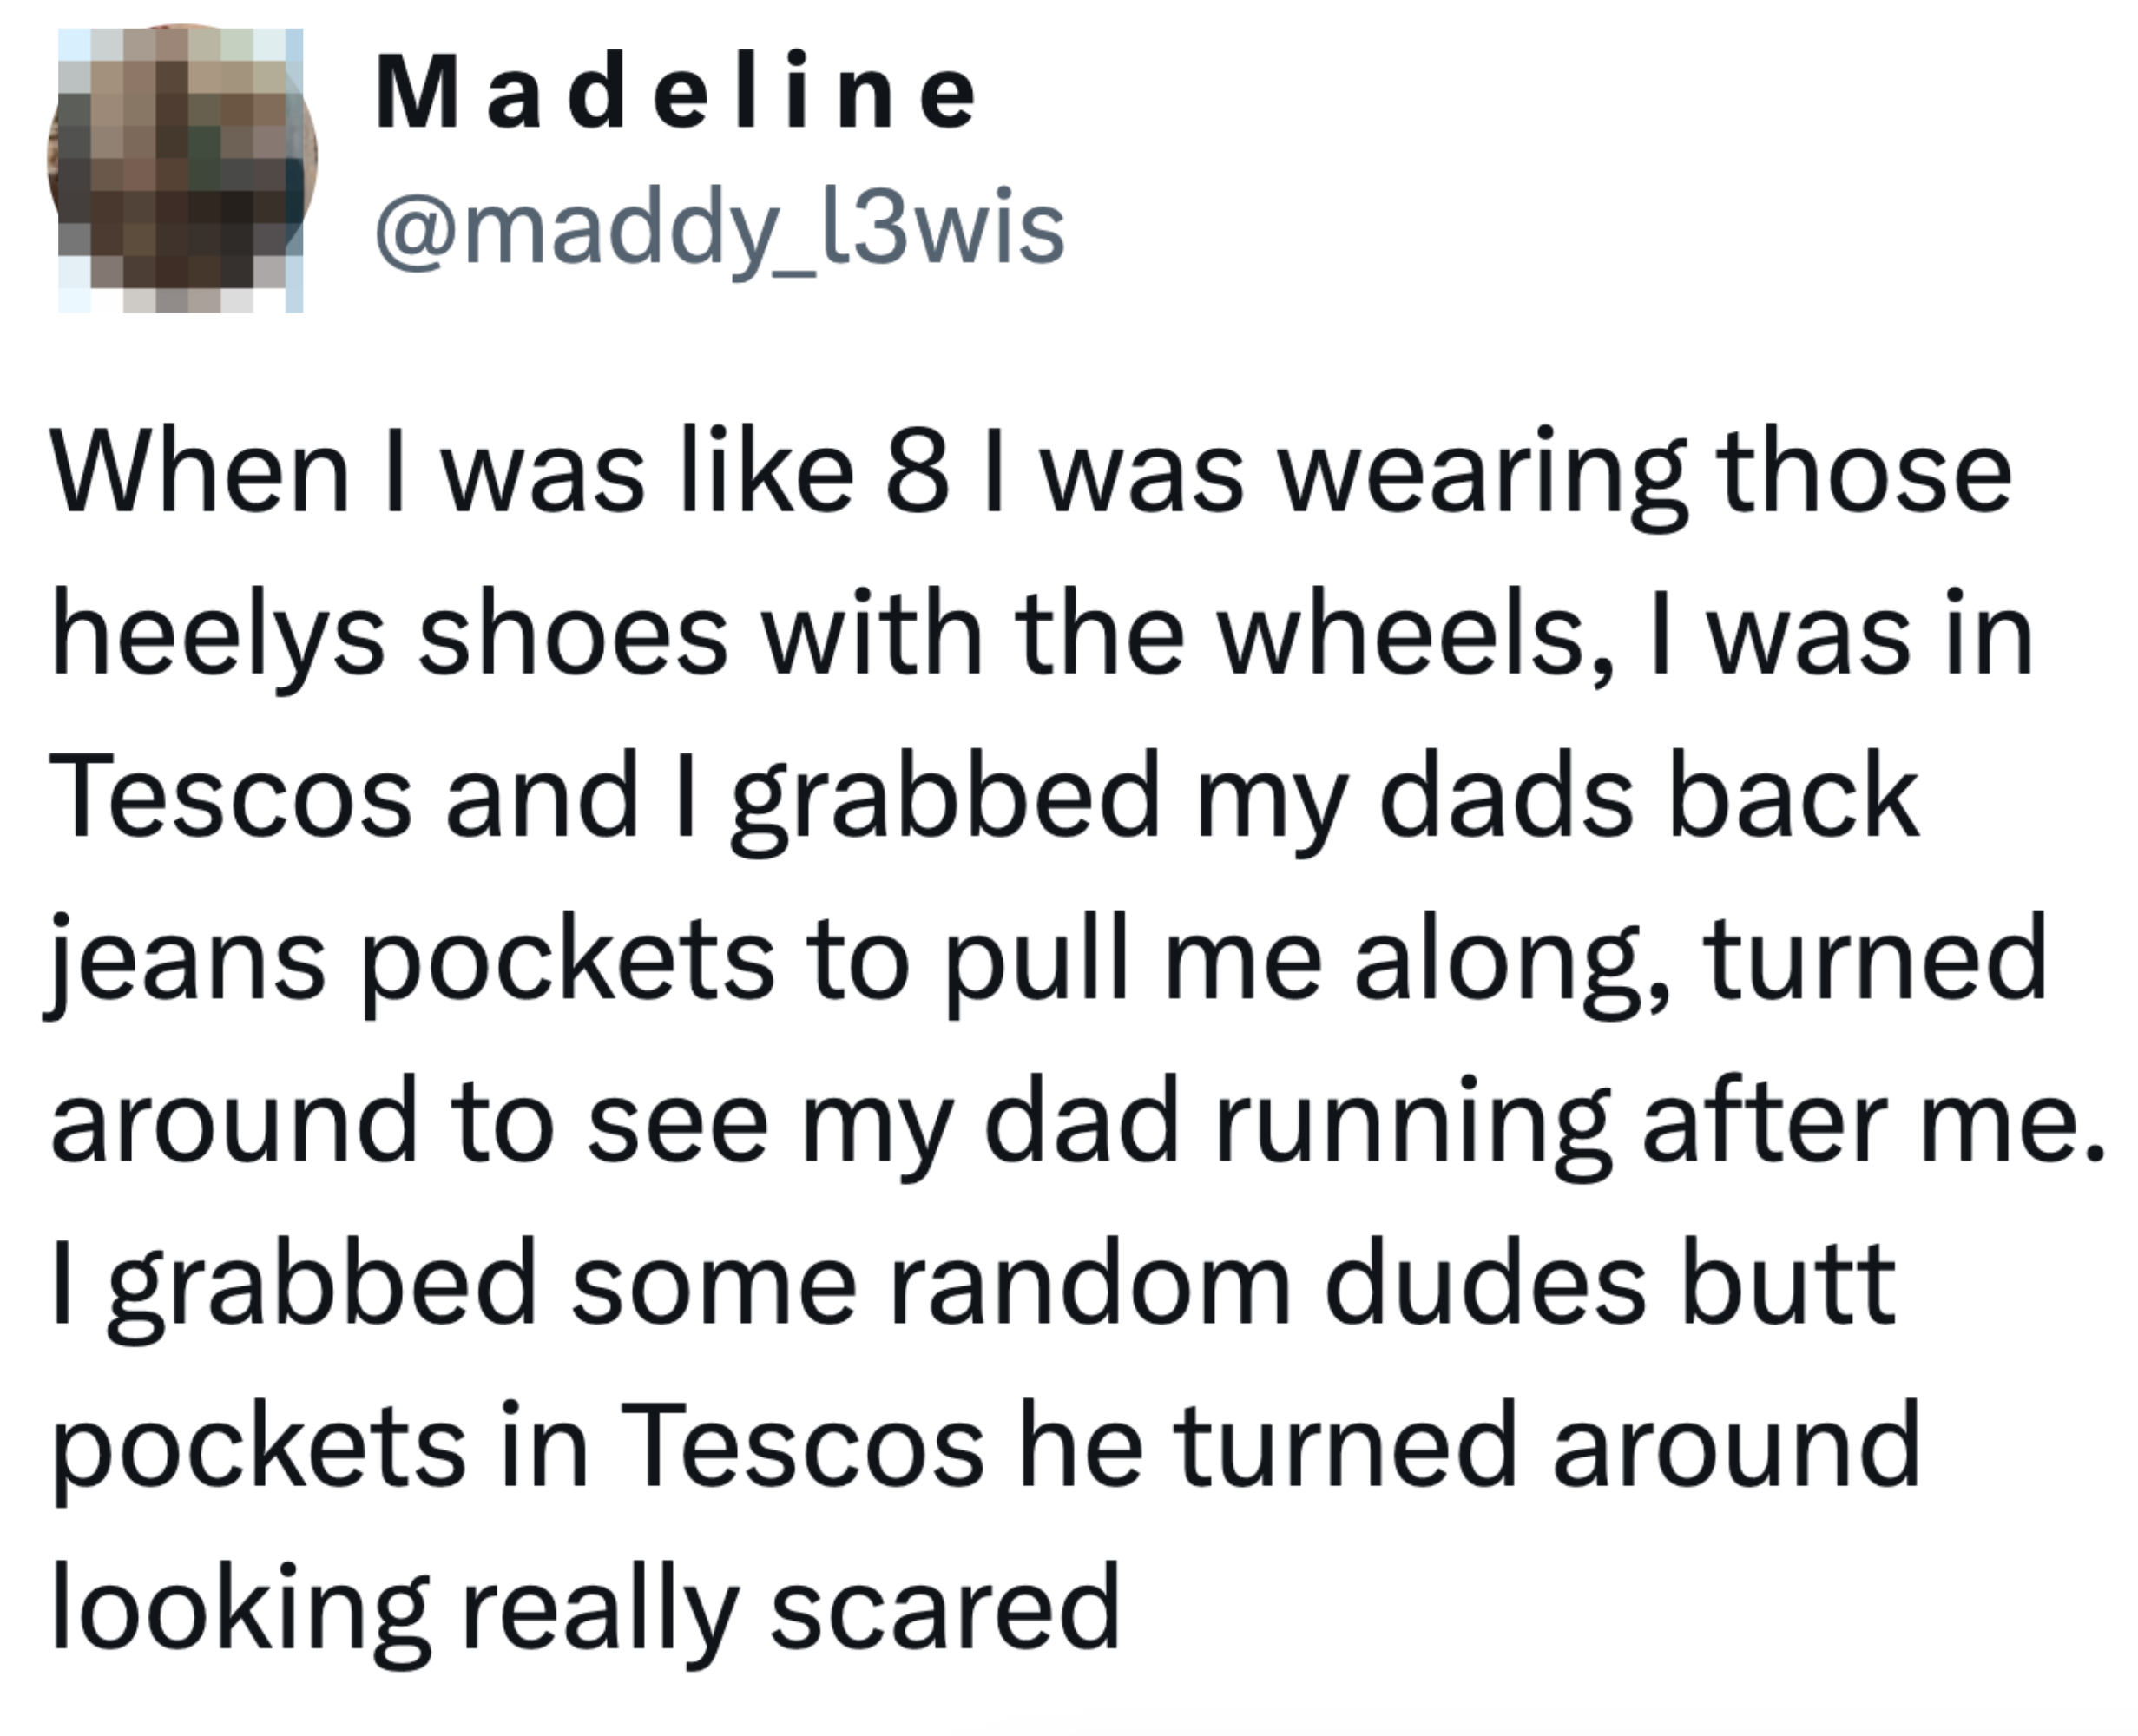 Tweet recalling a childhood memory of accidentally grabbing a stranger&#x27;s hand while wearing wheeled shoes in a Tesco store